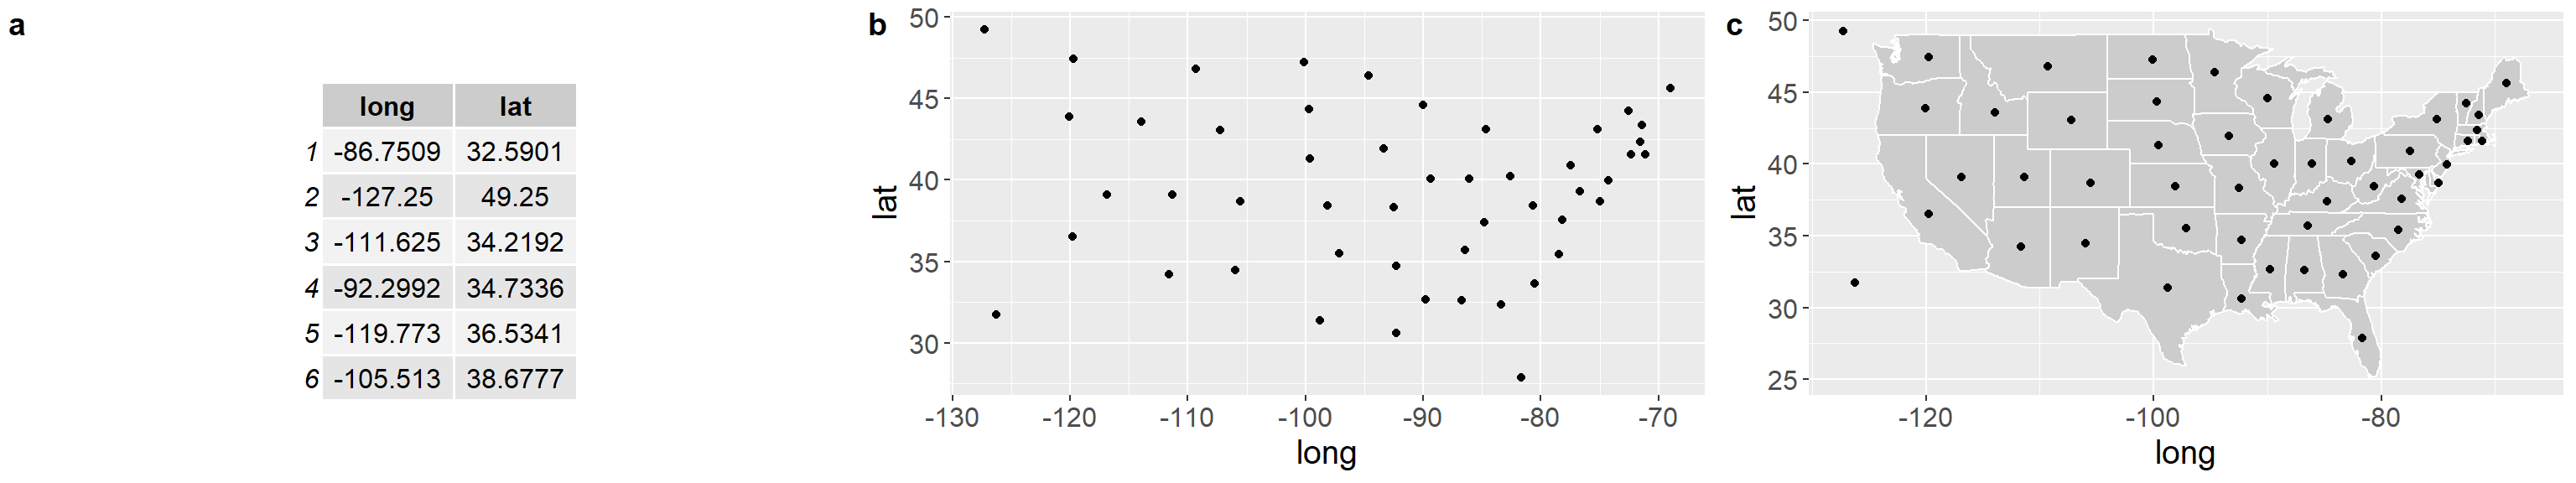 a) First six rows of data, b) The same data plotted on an x-y coordinate with latitude (lat) on the y-axis and longitude (long) on the x-axis, c) The same plot, but with polygons of US States added for context.